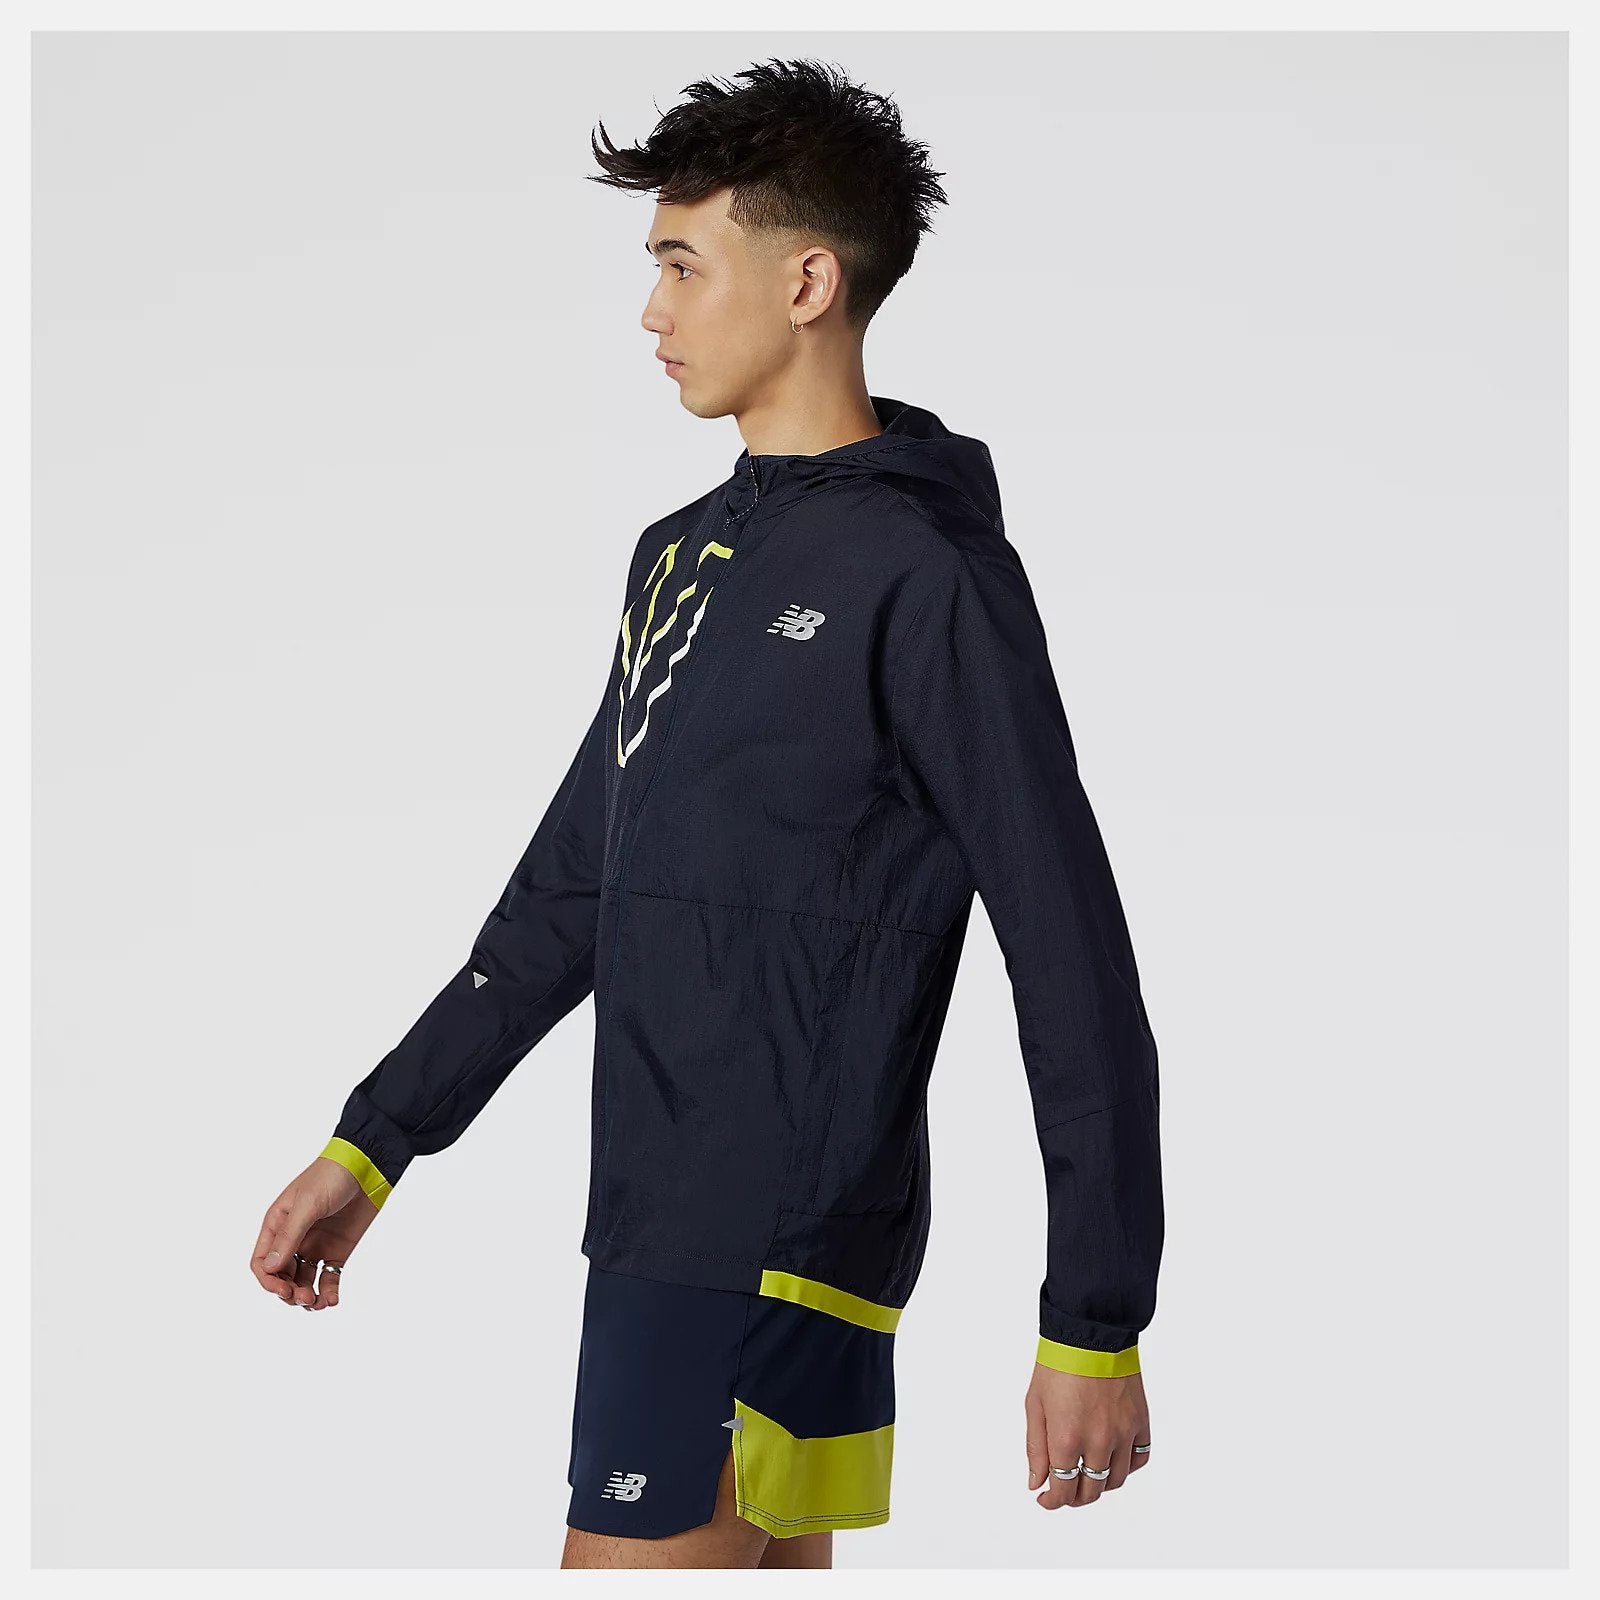 Side view of a model wearing the Men's Printed Impact Run Light Jacket from New Balance in Sulphur Yellow